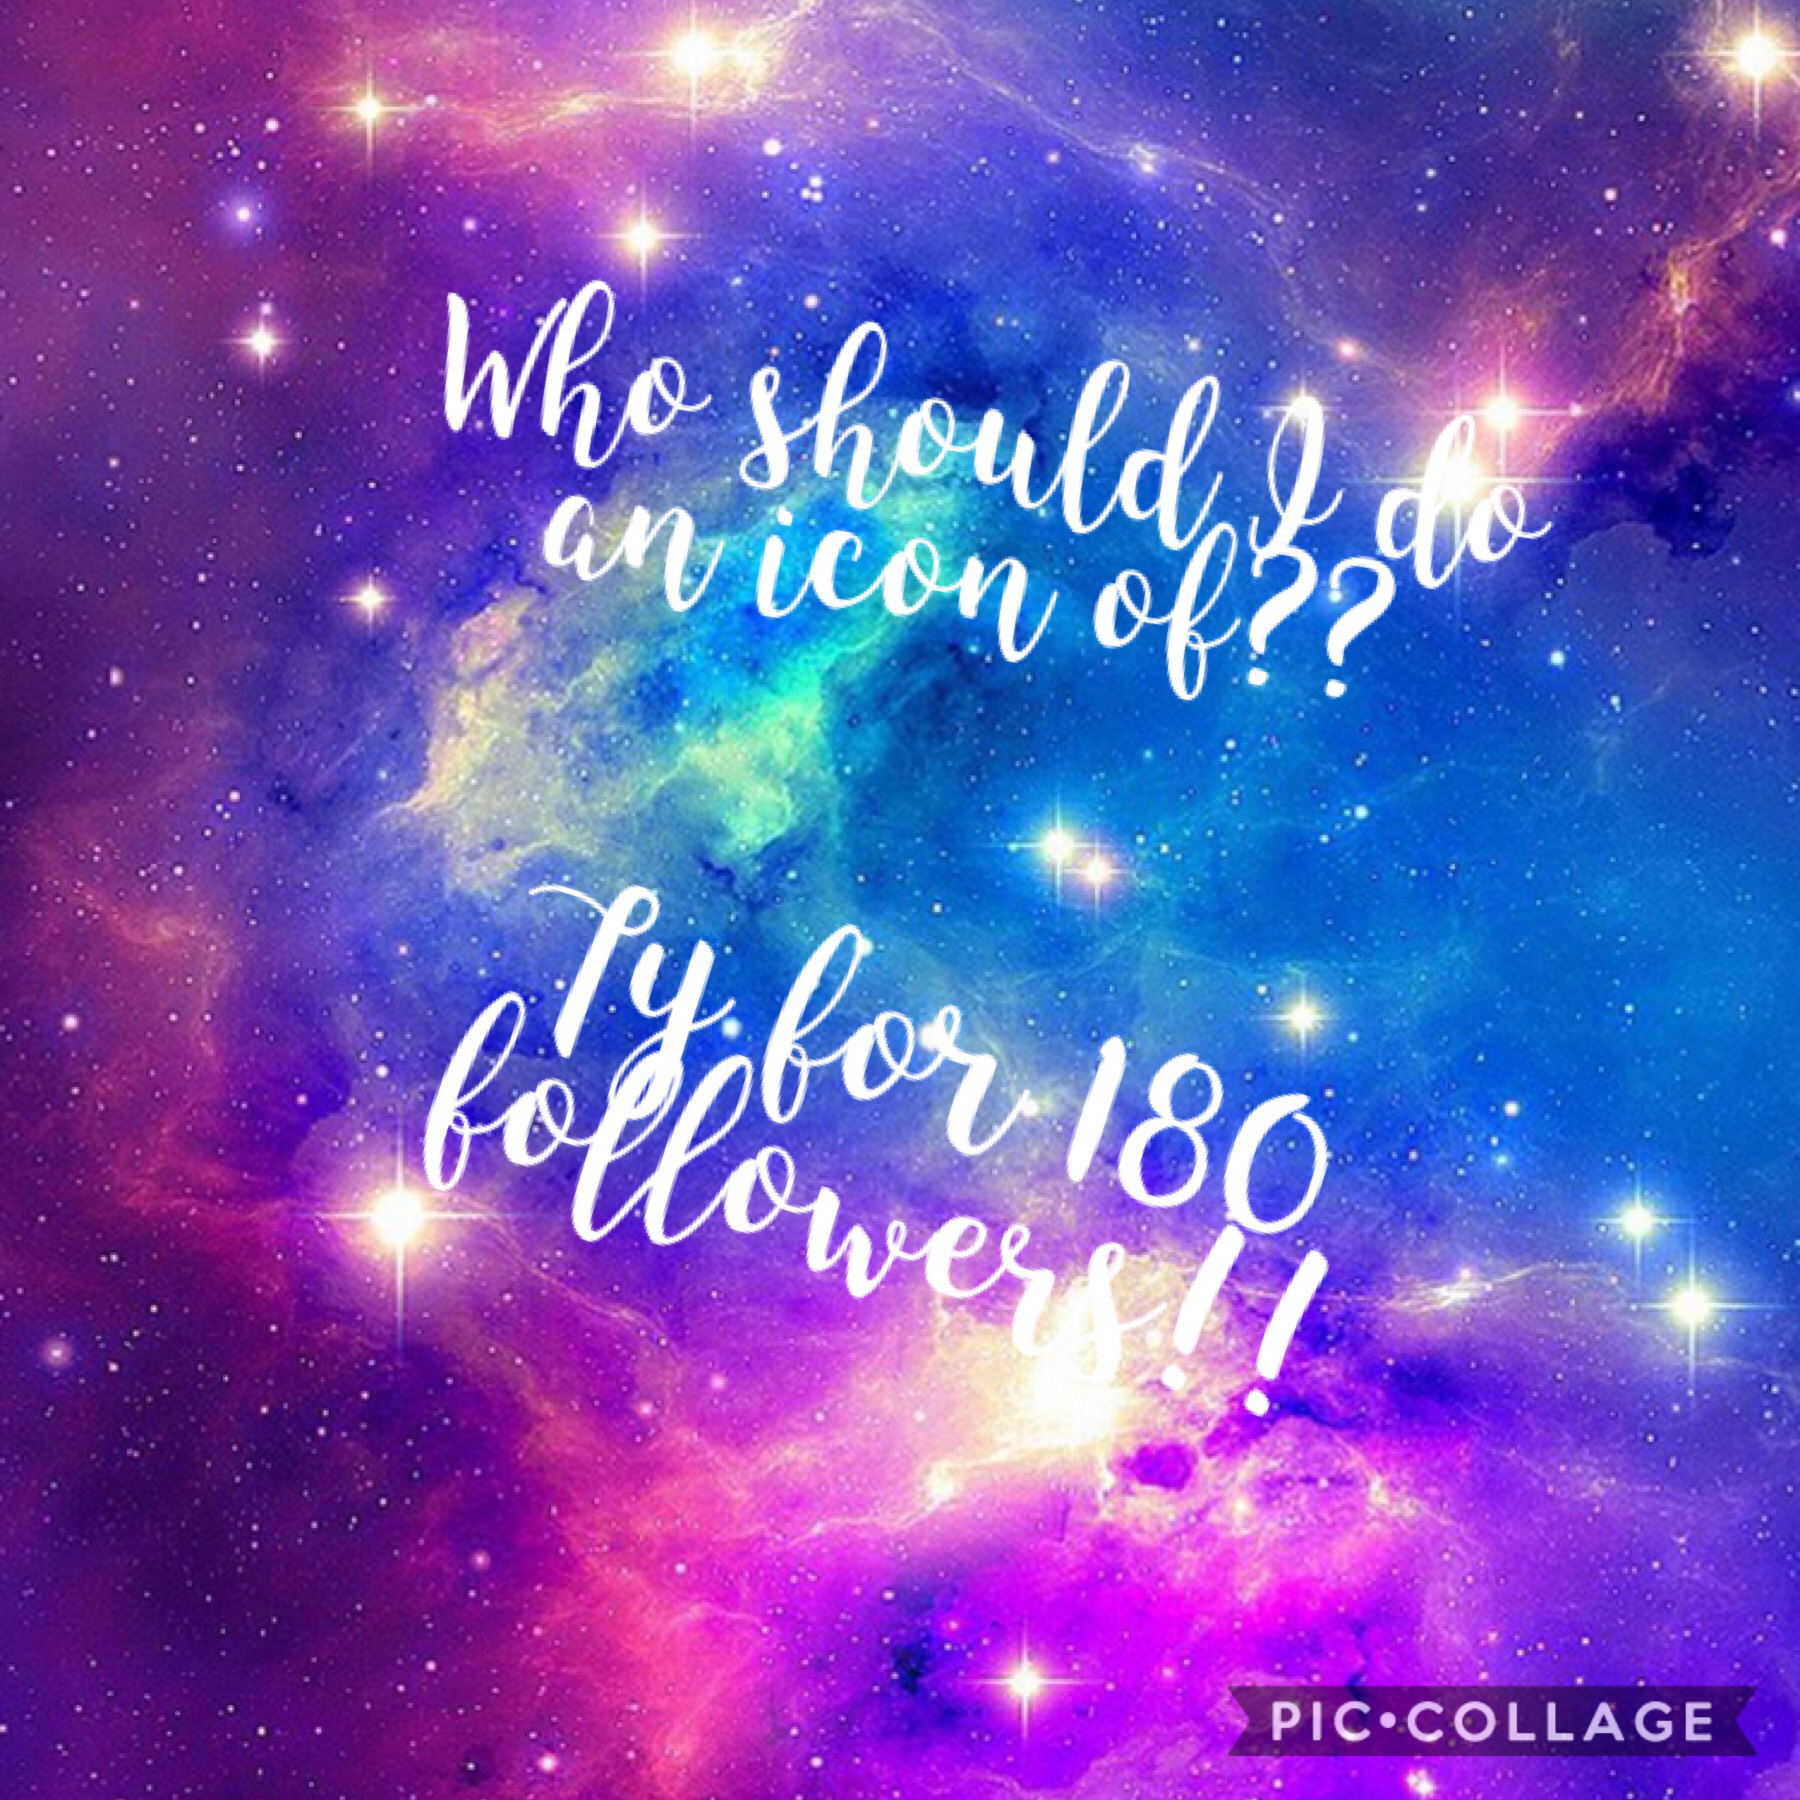 Who should i do an  icon of? Tysm for 180 followers!!